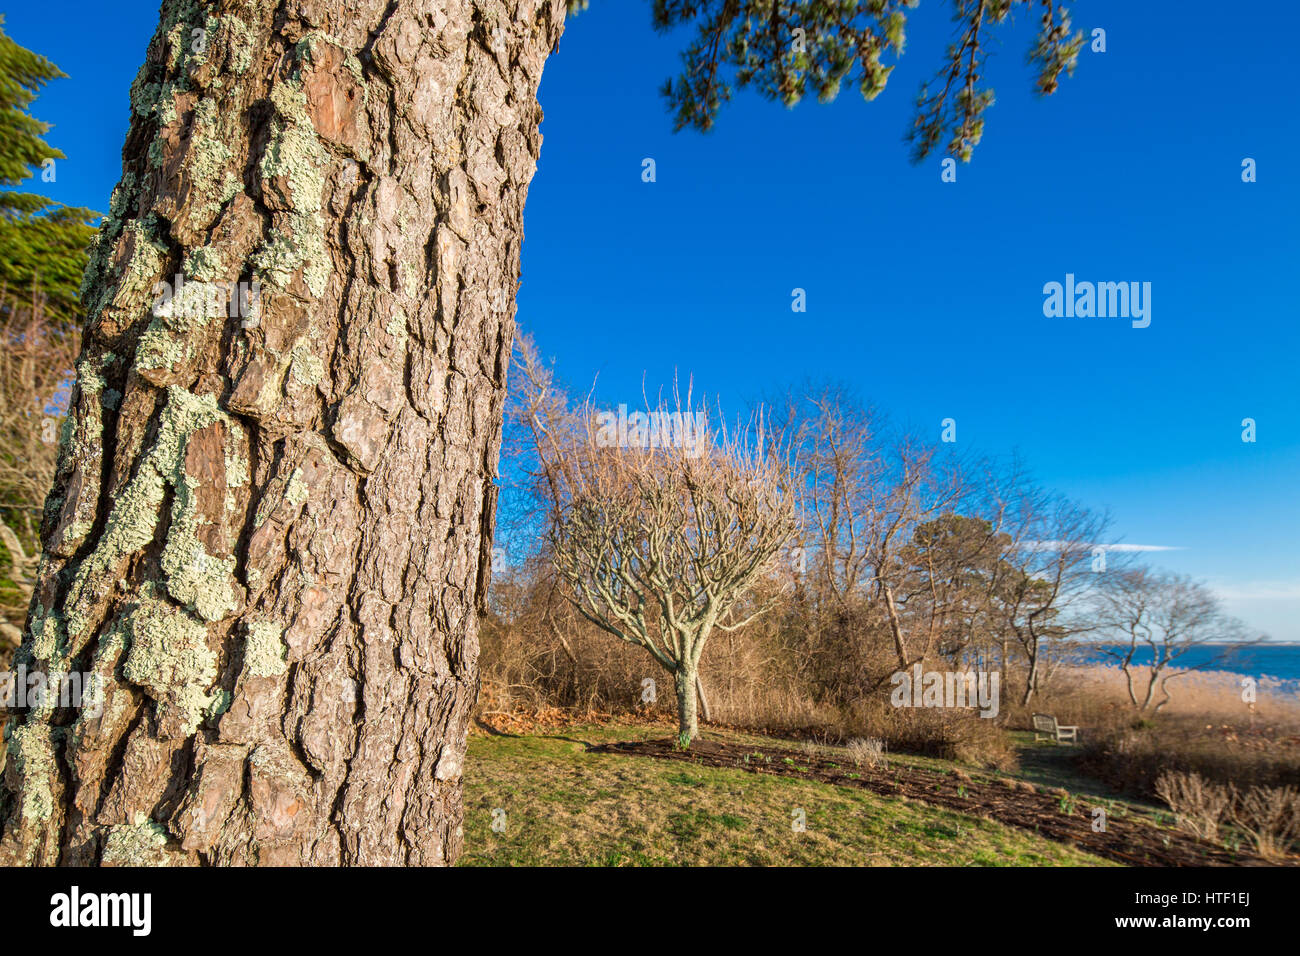 large tree with distant trees in the background and a bright blue sky Stock Photo